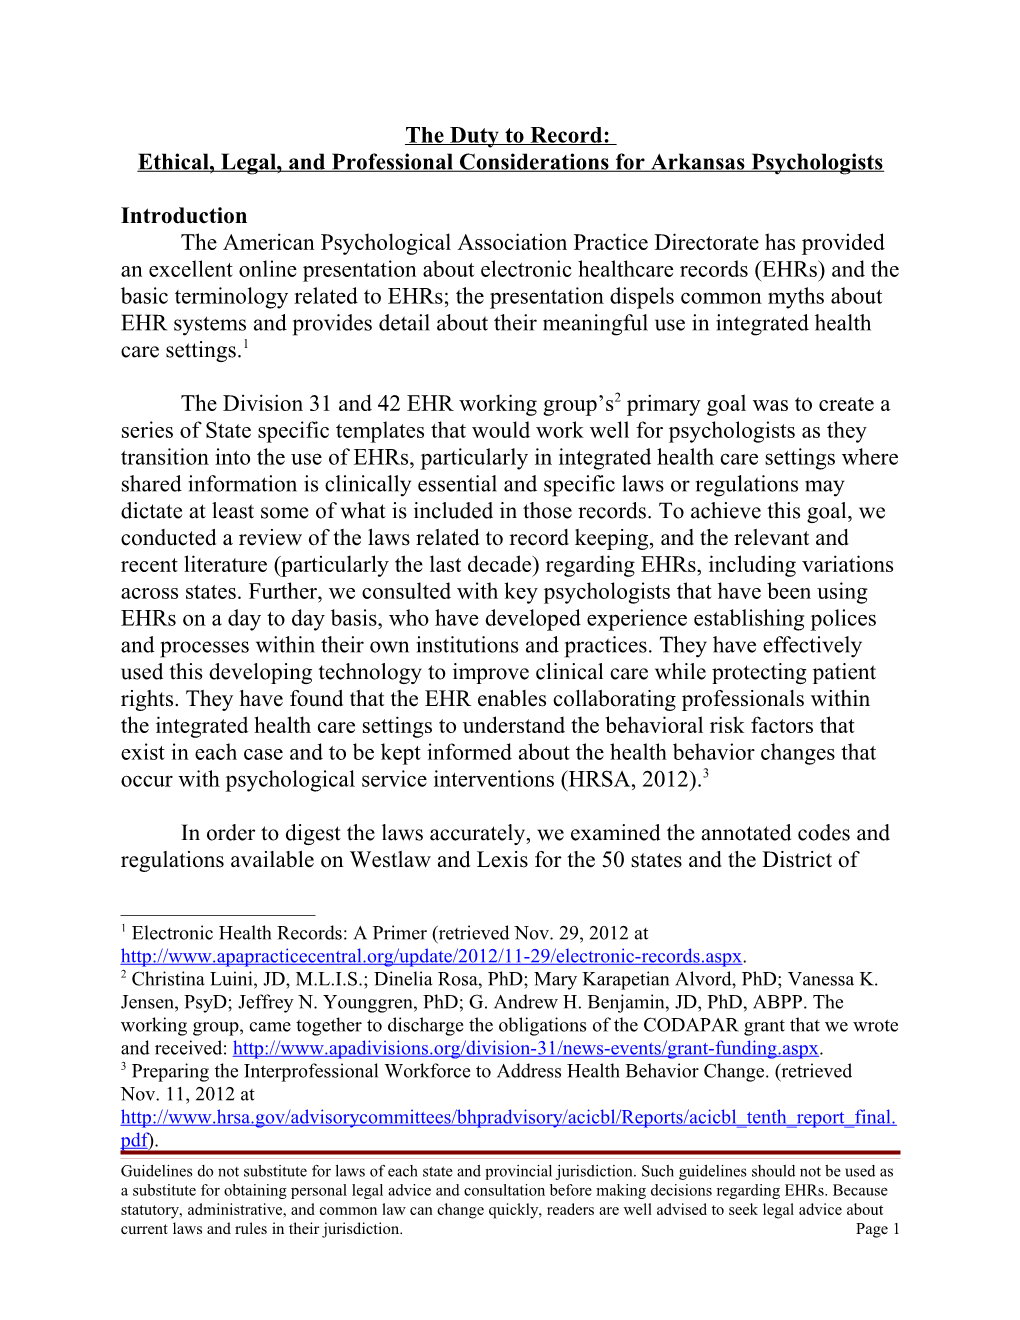 Ethical, Legal, and Professional Considerations for Arkansas Psychologists